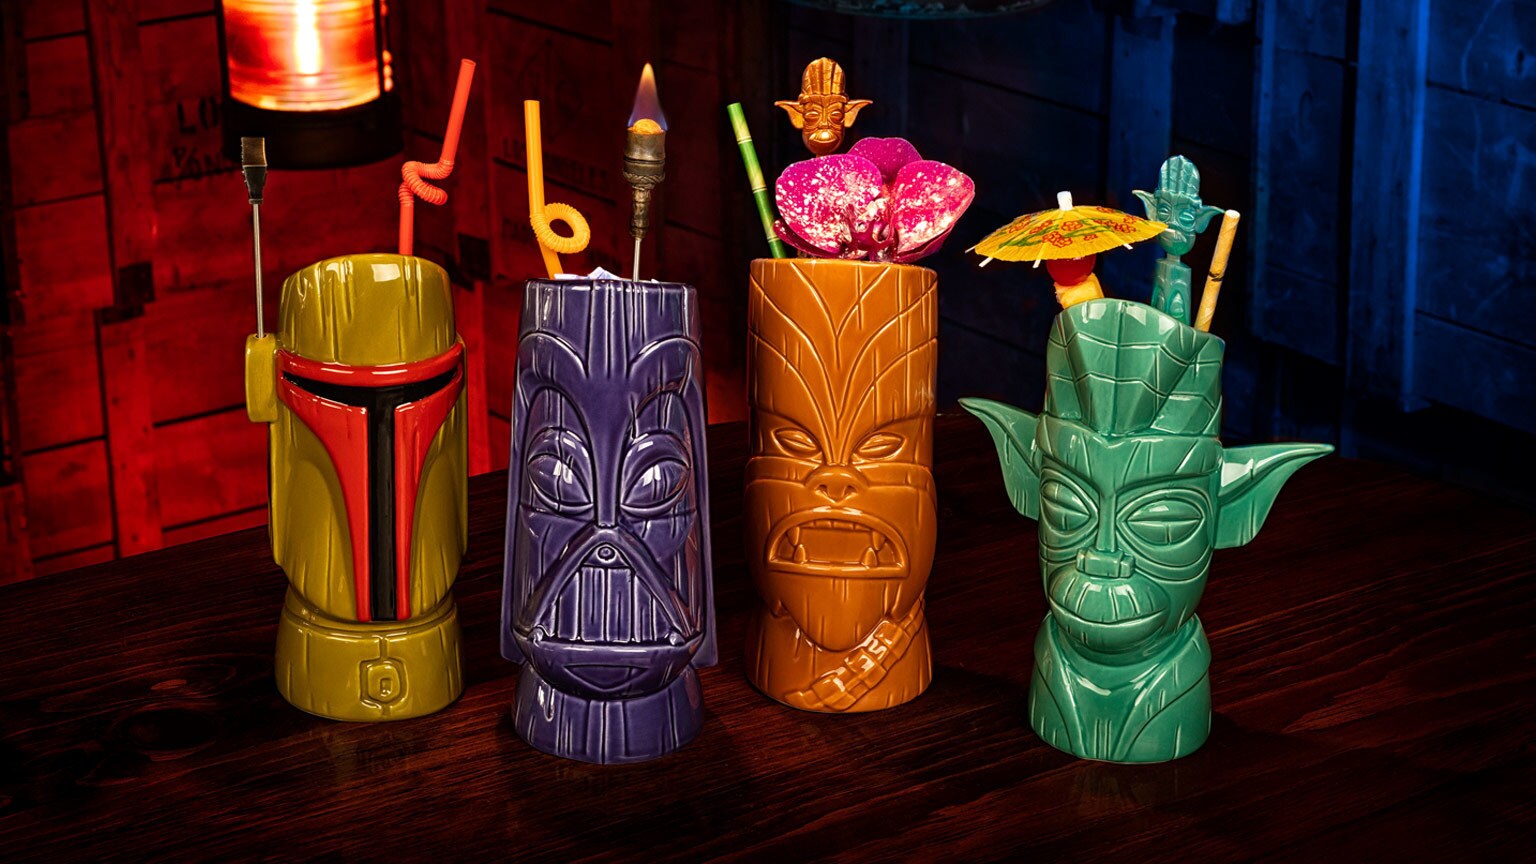 How SHAG and Beeline Creative Made Star Wars Geeki Tikis That Will Be Long Remembered